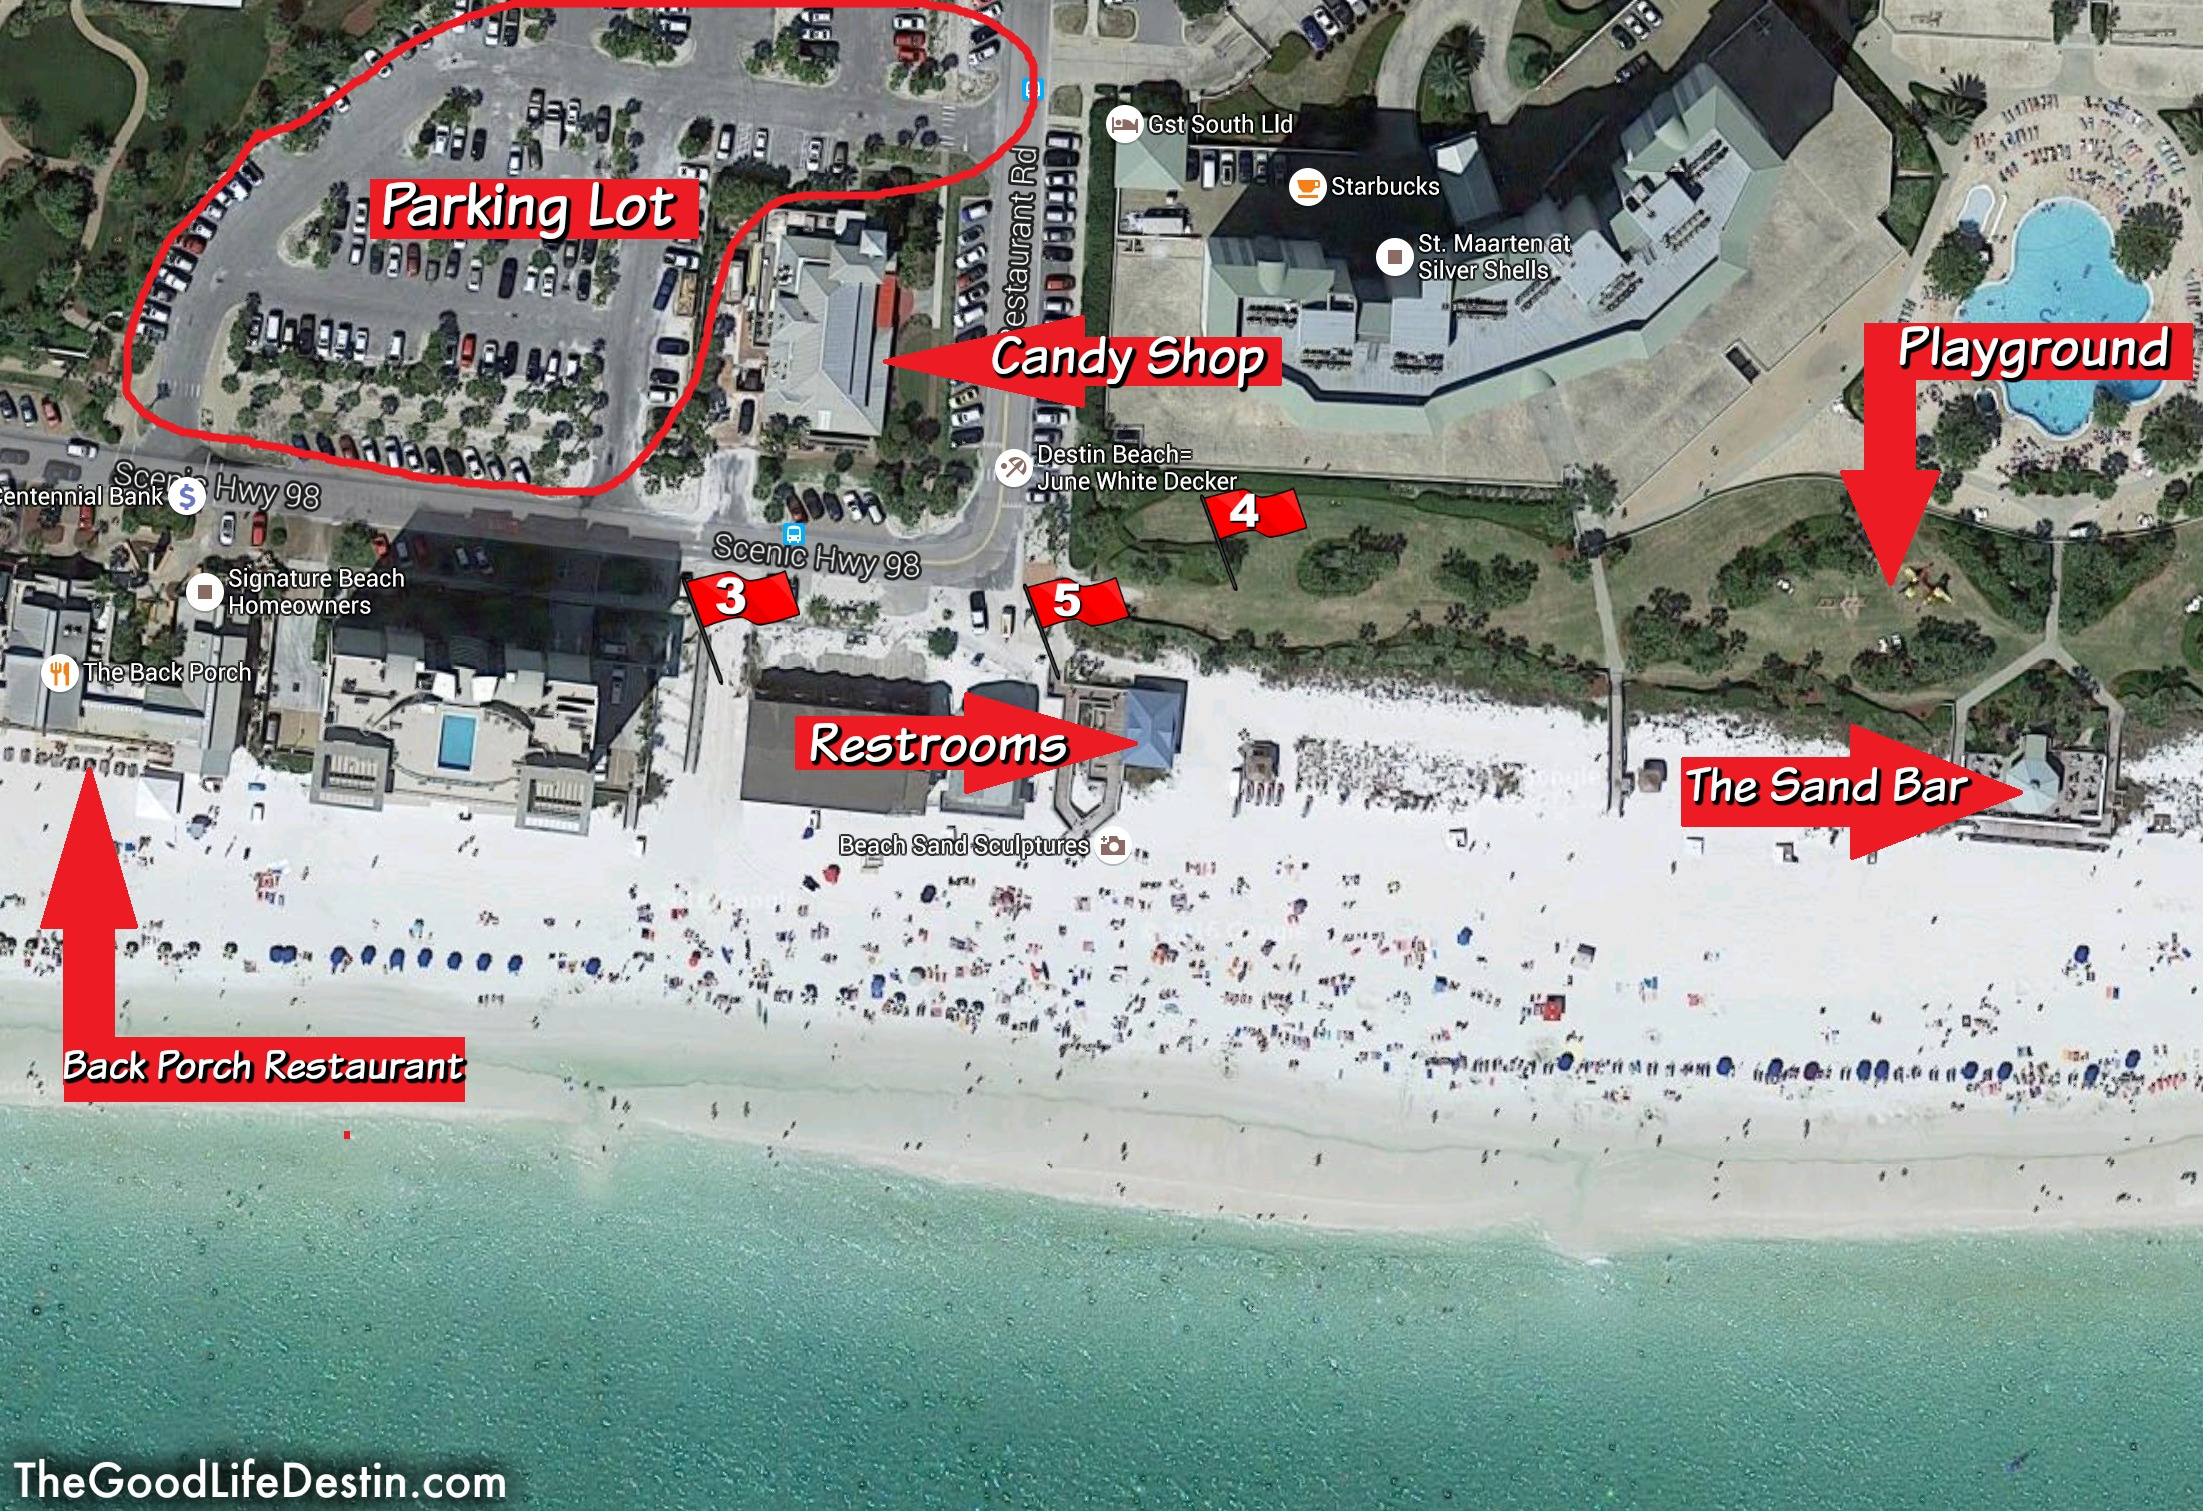 Find Your Perfect Beach In Destin Florida - The Good Life Destin - Where Is Destin Beach Florida On The Map